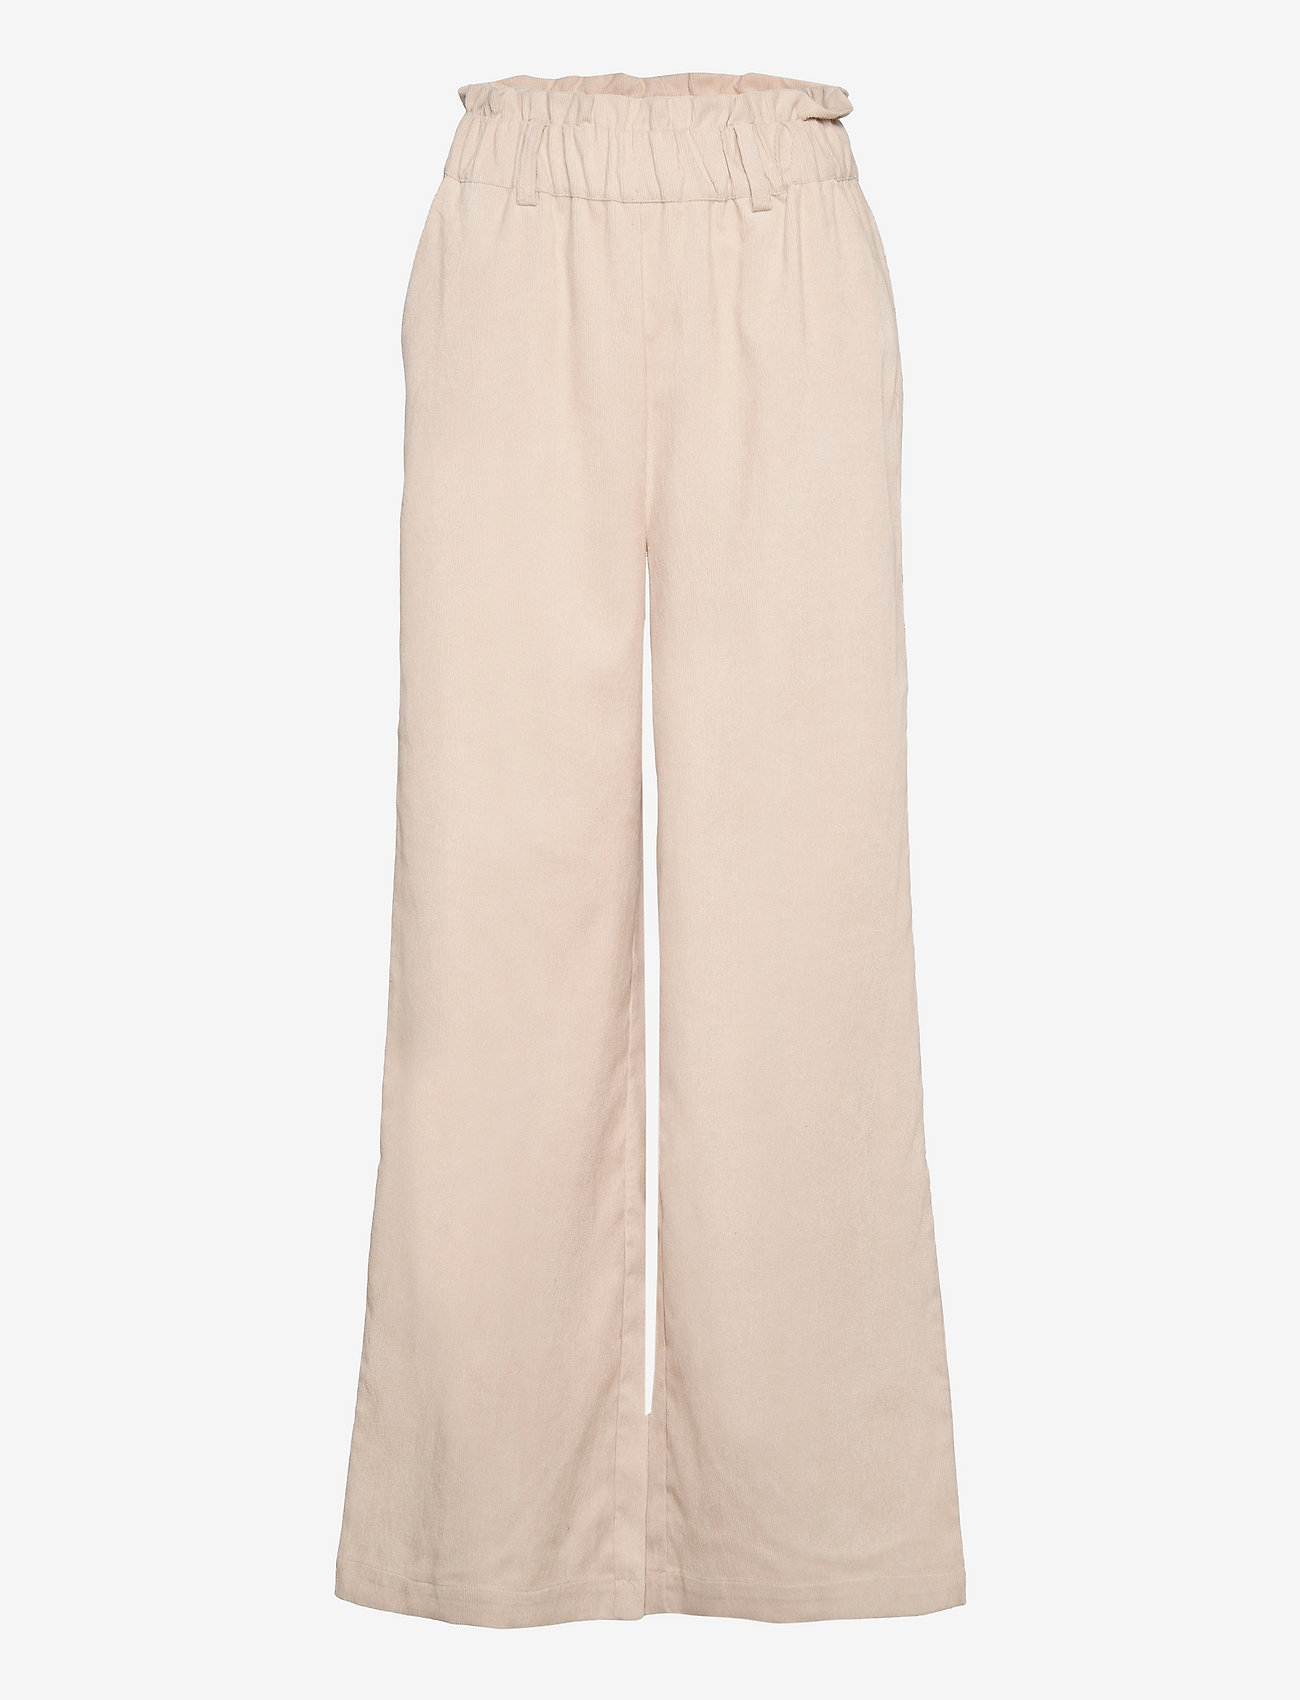 Lollys Laundry Vicky Pants - Trousers | Boozt.com